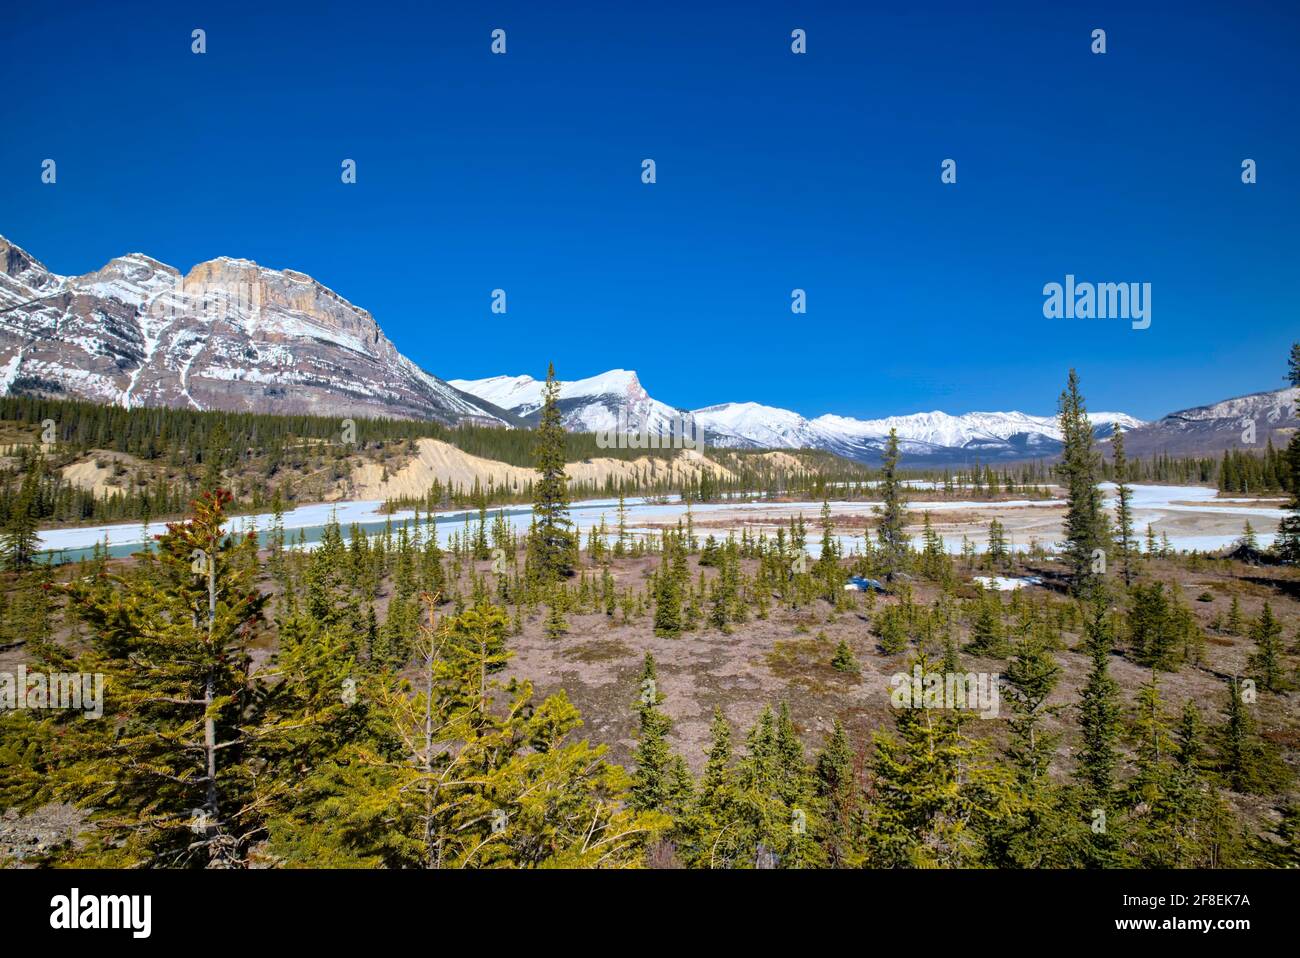 It was named 'The Crossing', when travellers and fur traders used this spot to cross the North Saskatchewan River on their way to British Columbia in Stock Photo